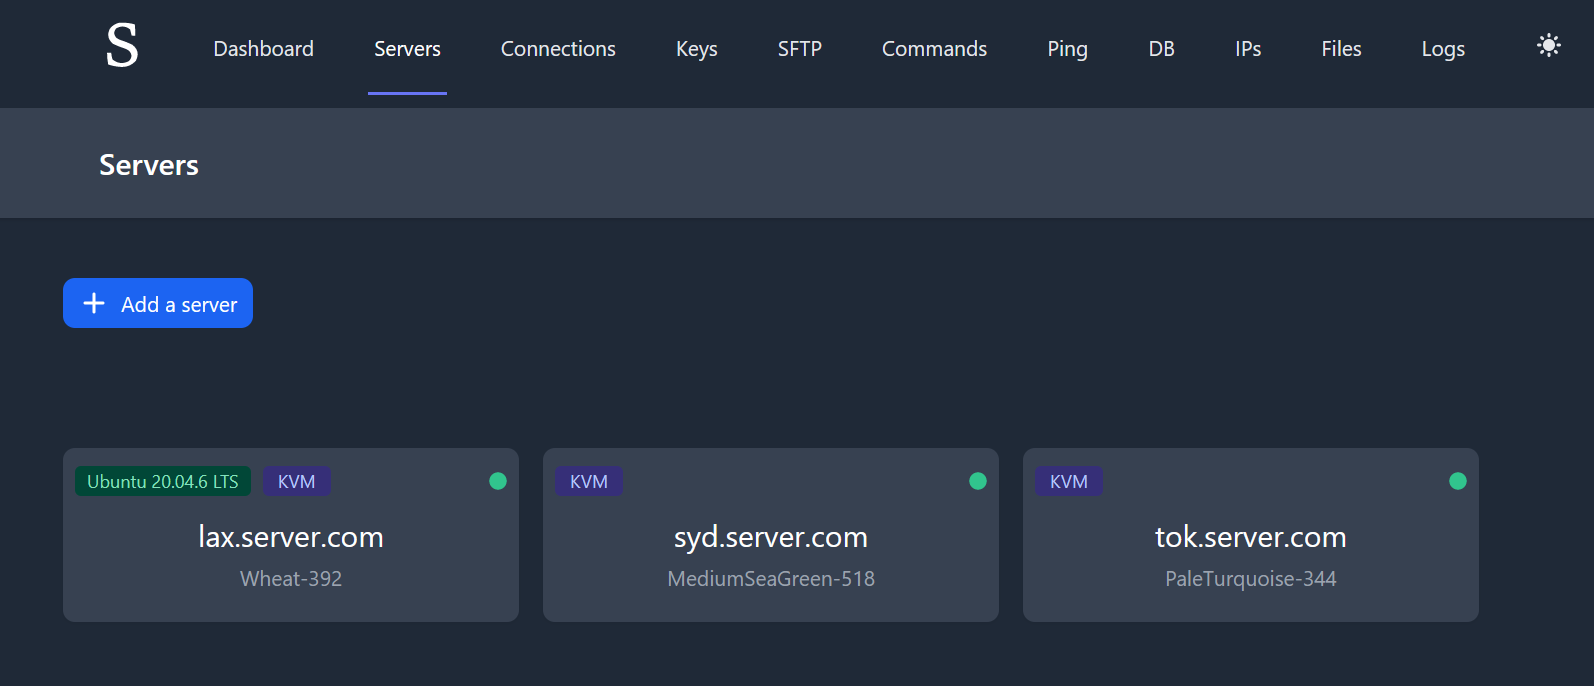 Servers index page